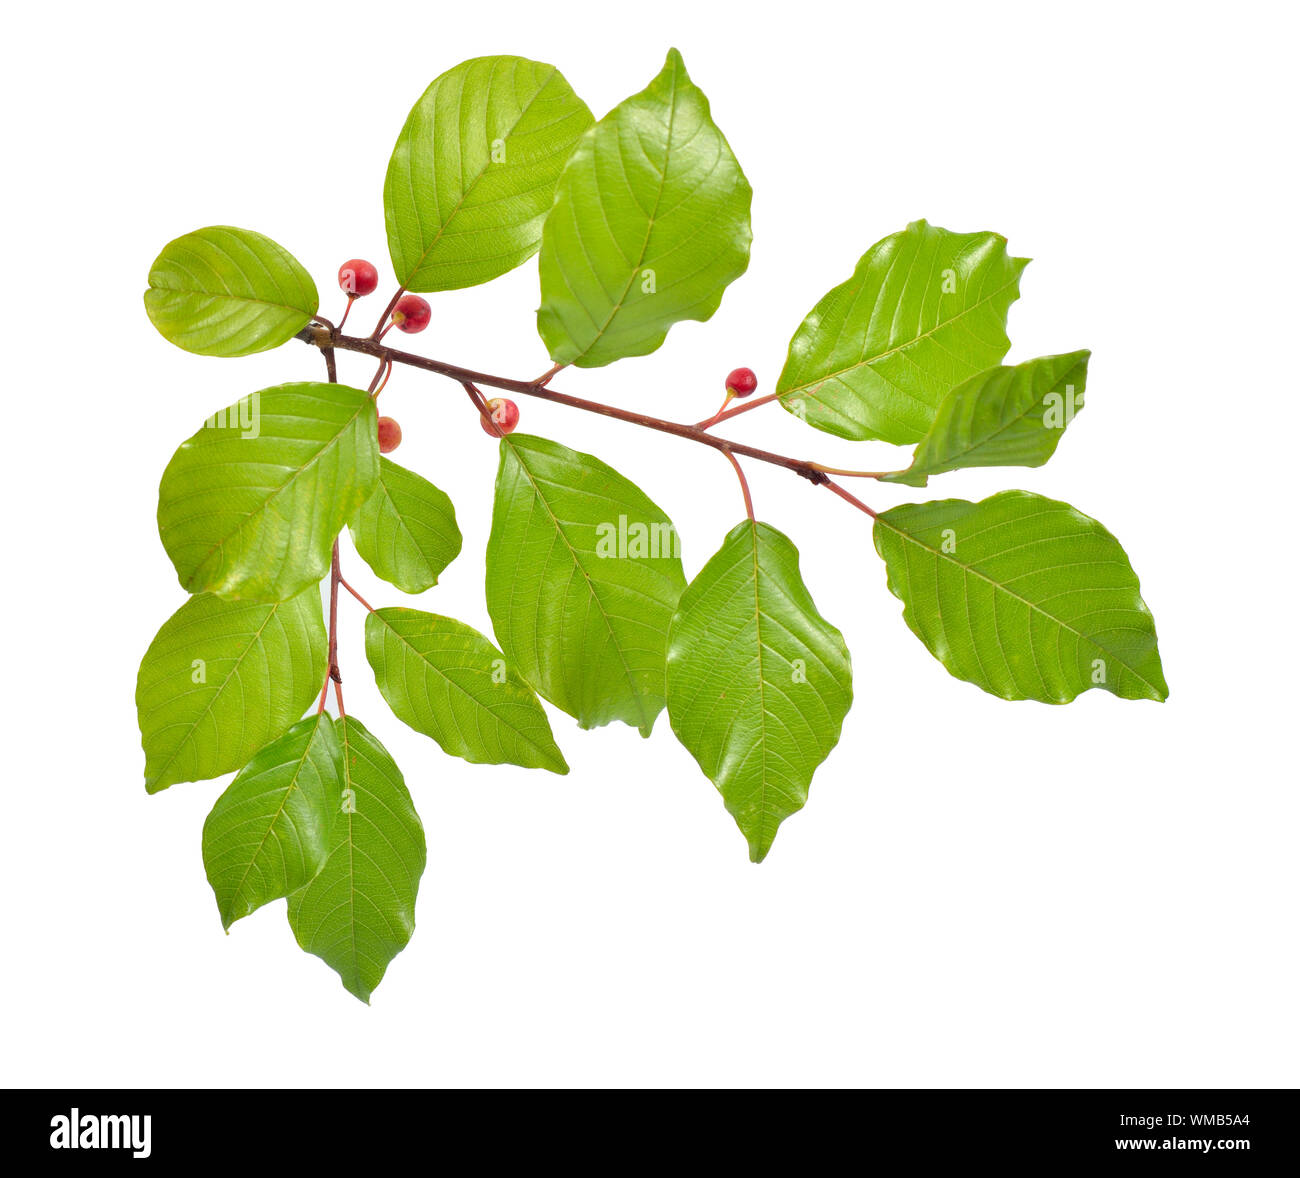 Frangula or buckthorns twig with berry isolated on white background. Stock Photo